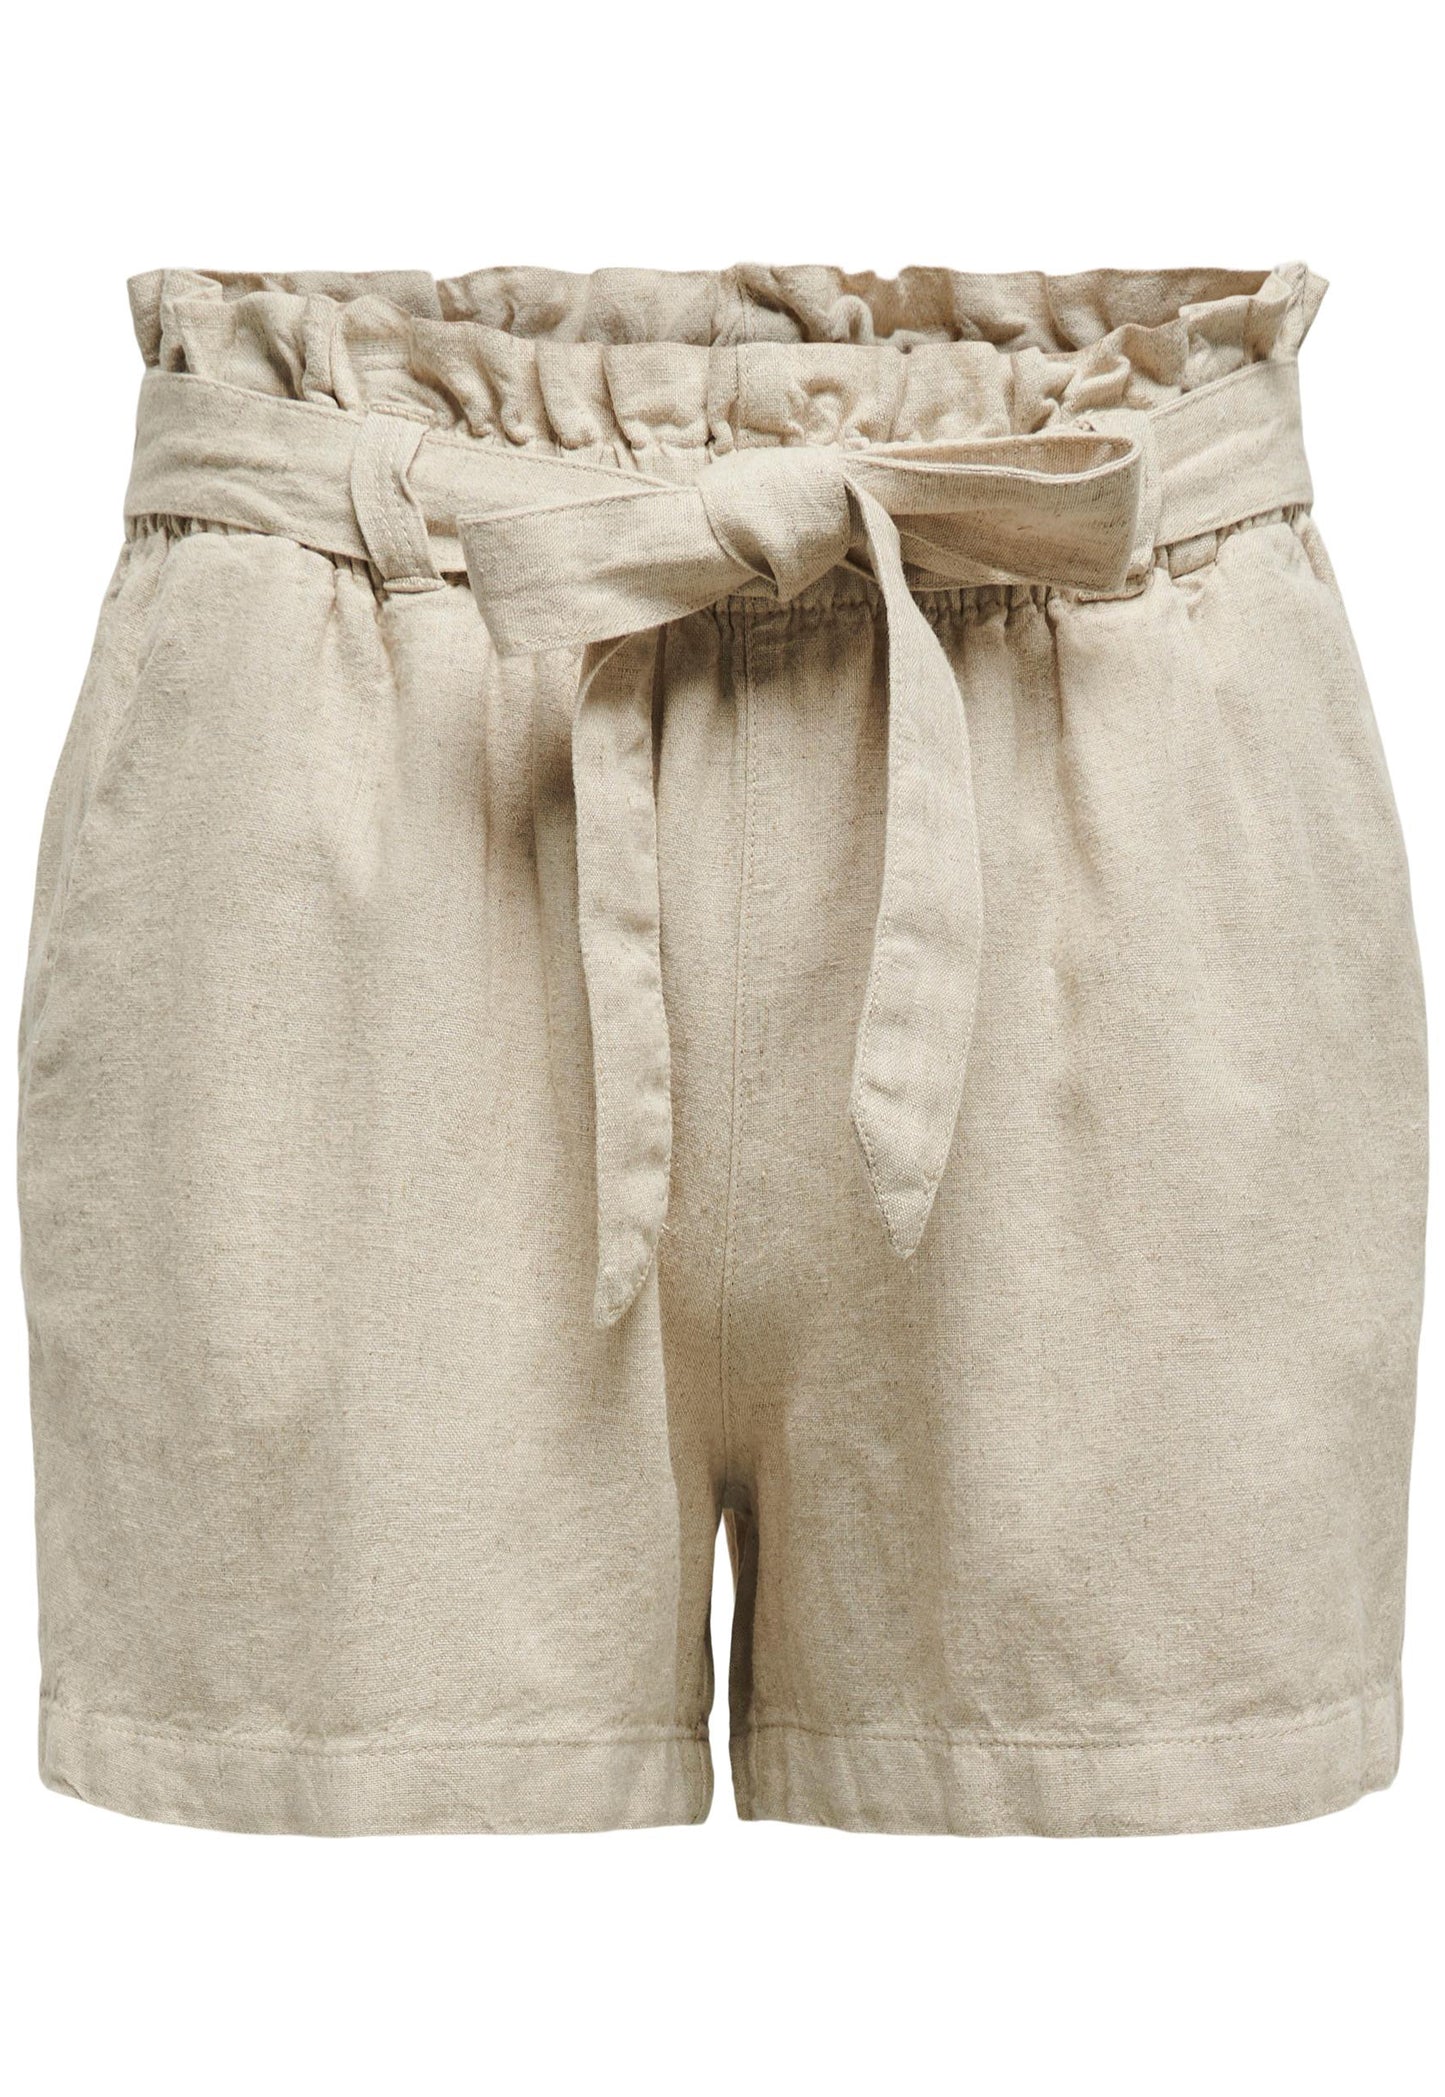 
                  
                    JDY Say High Waisted Linen Shorts with Belt in Beige - One Nation Clothing
                  
                